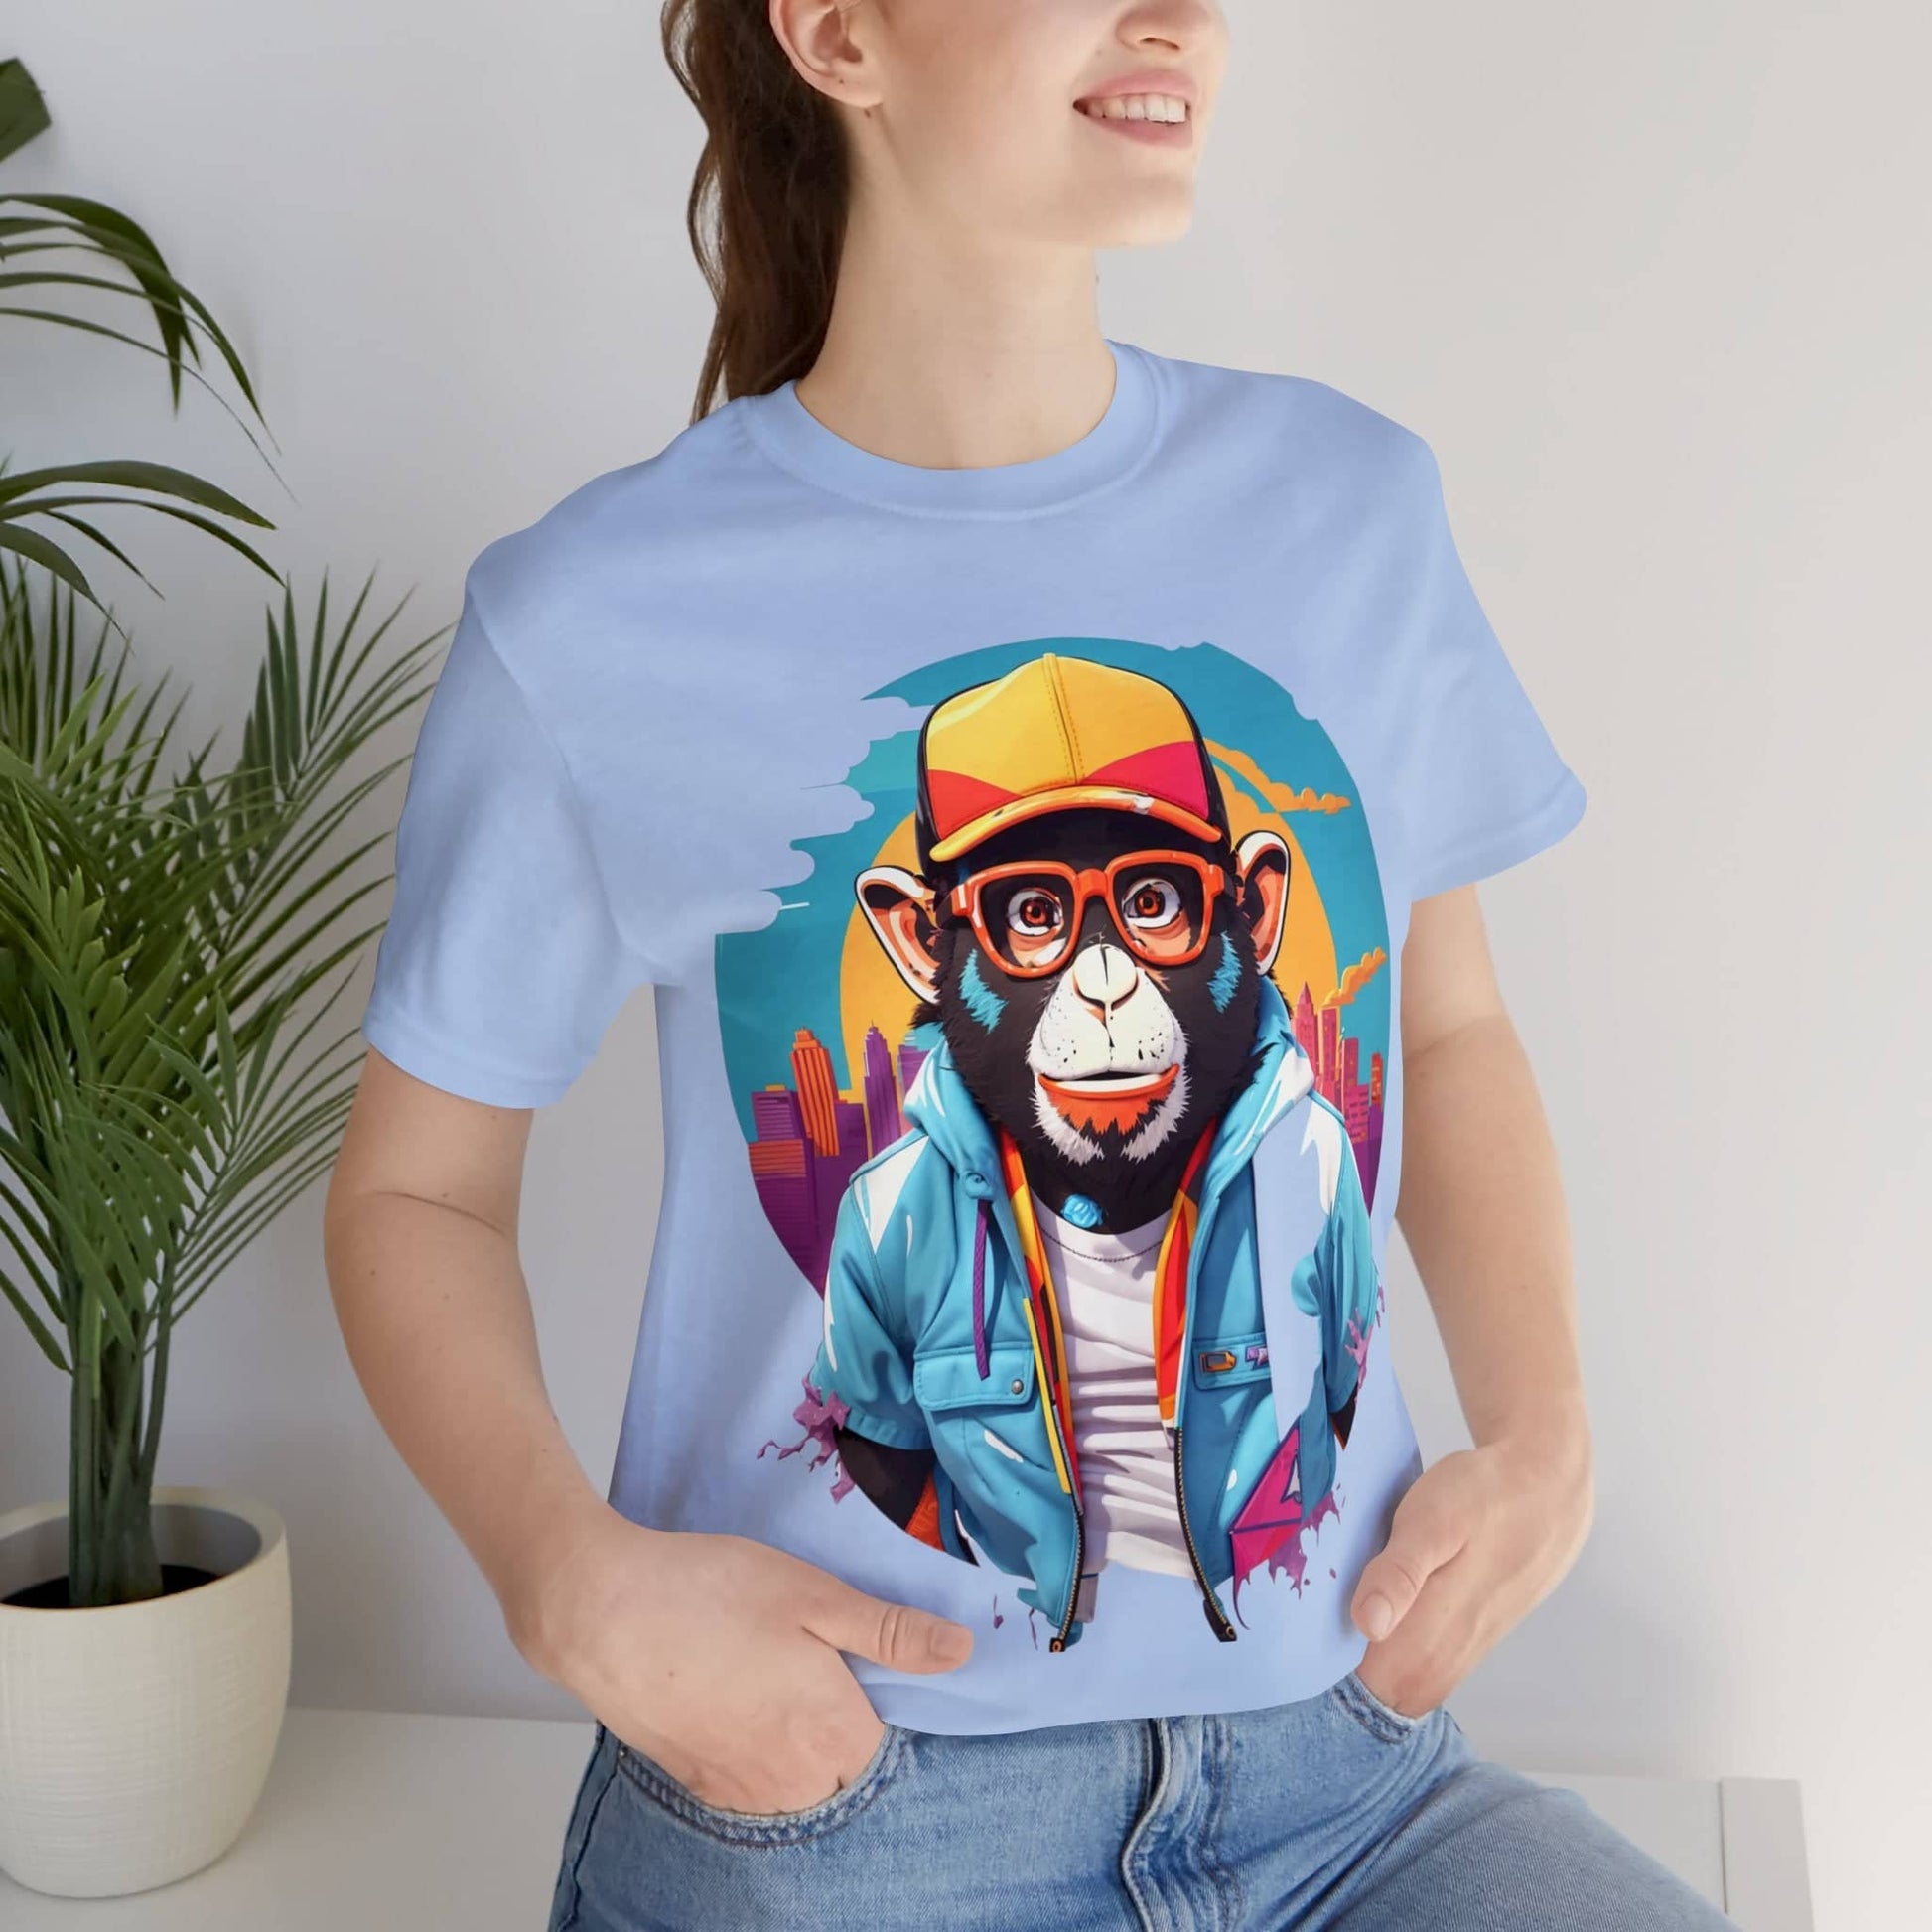 "Limited Edition Graffiti Gorilla: Urban Hip-Hop Graphic Tee for the Trendy Streetwear Connoisseur" T-Shirt Bigger Than Life Baby Blue S 